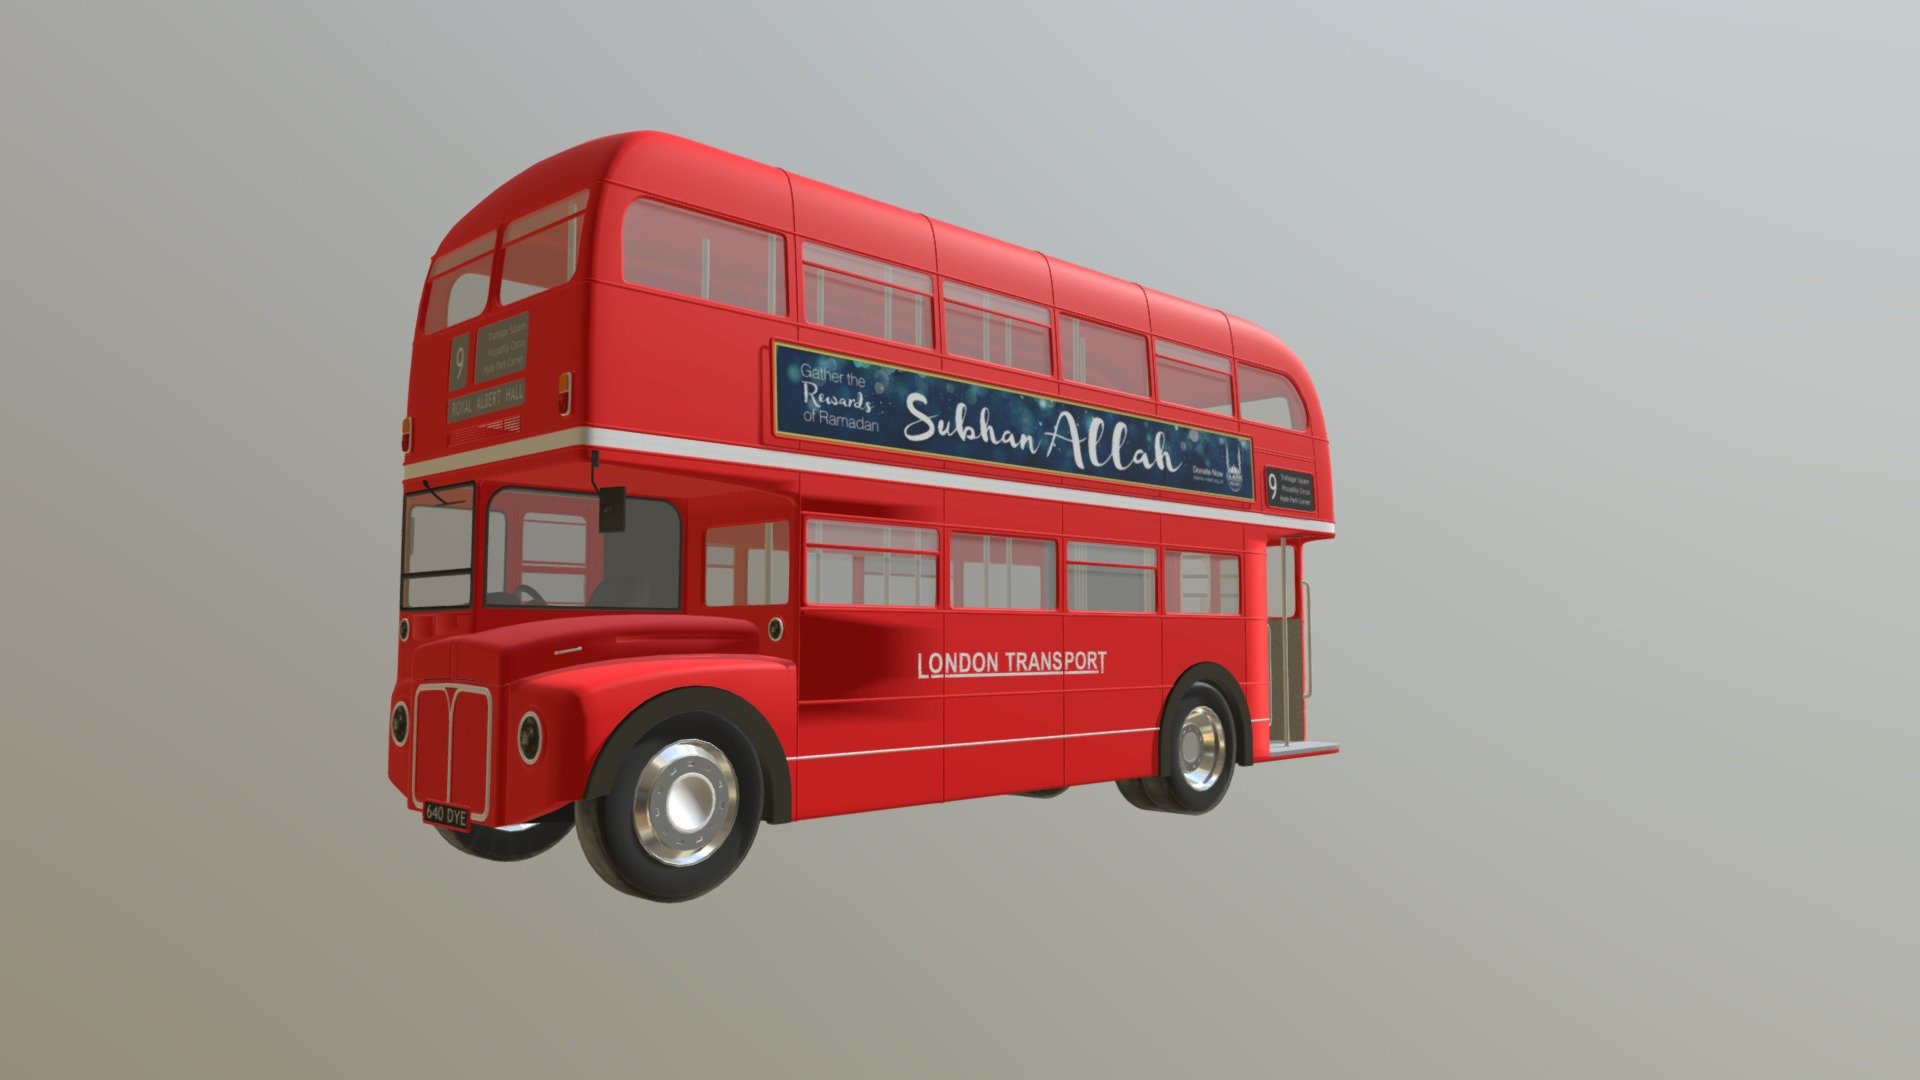 London Bus
originally created with 3ds Max 2015 and rendered in Mental Ray.

Total Poly Counts:
Poly Count = 53774
Vertex Count = 58349

https://nuralam3d.blogspot.com/2019/09/london-bus.html - London Bus - 3D model by nuralam018 3d model